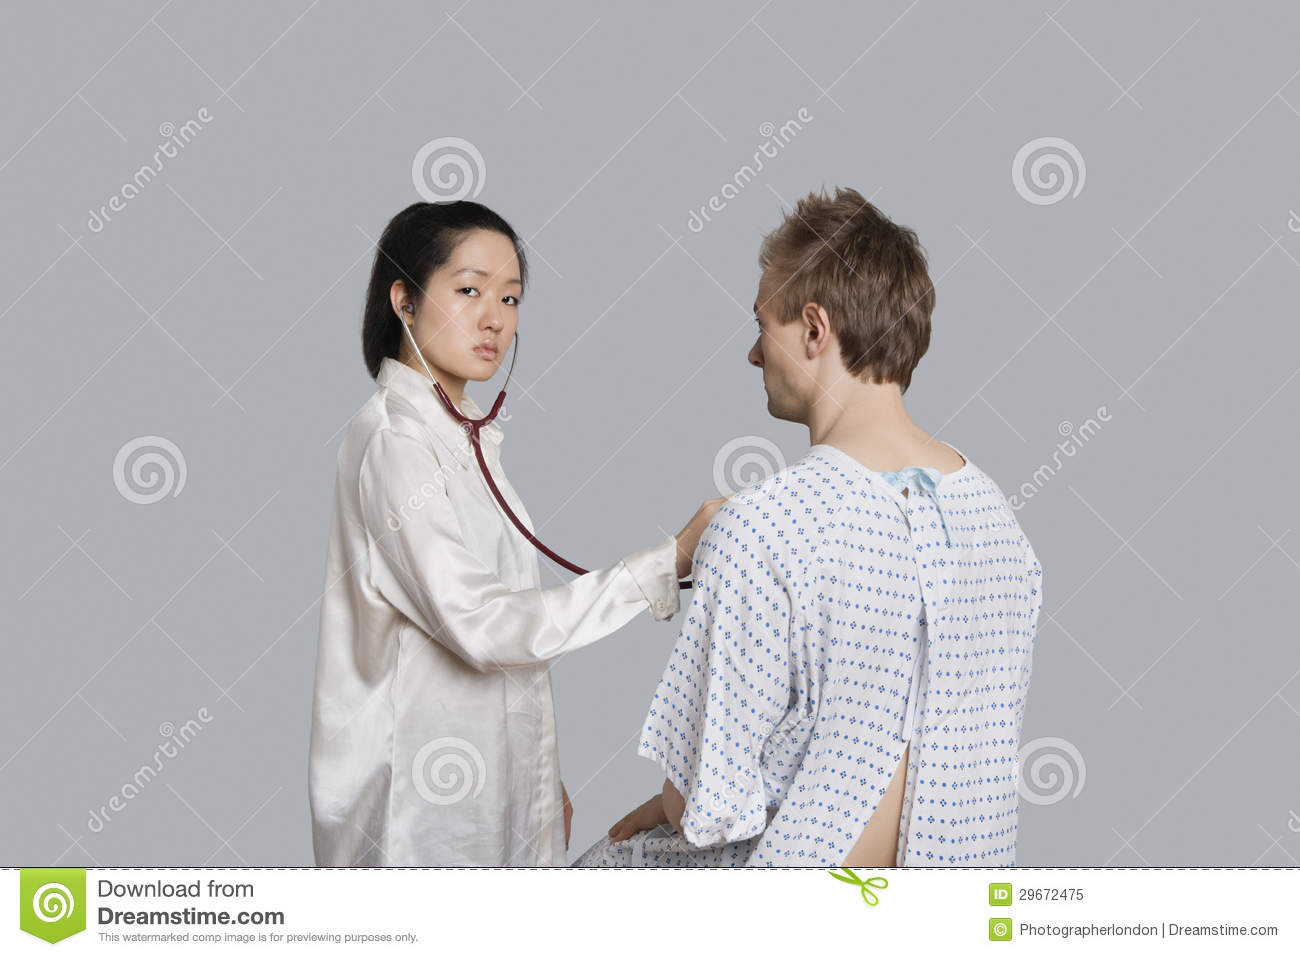 Portrait Of A Young Female Doctor Examining Male Patient Royalty Free    